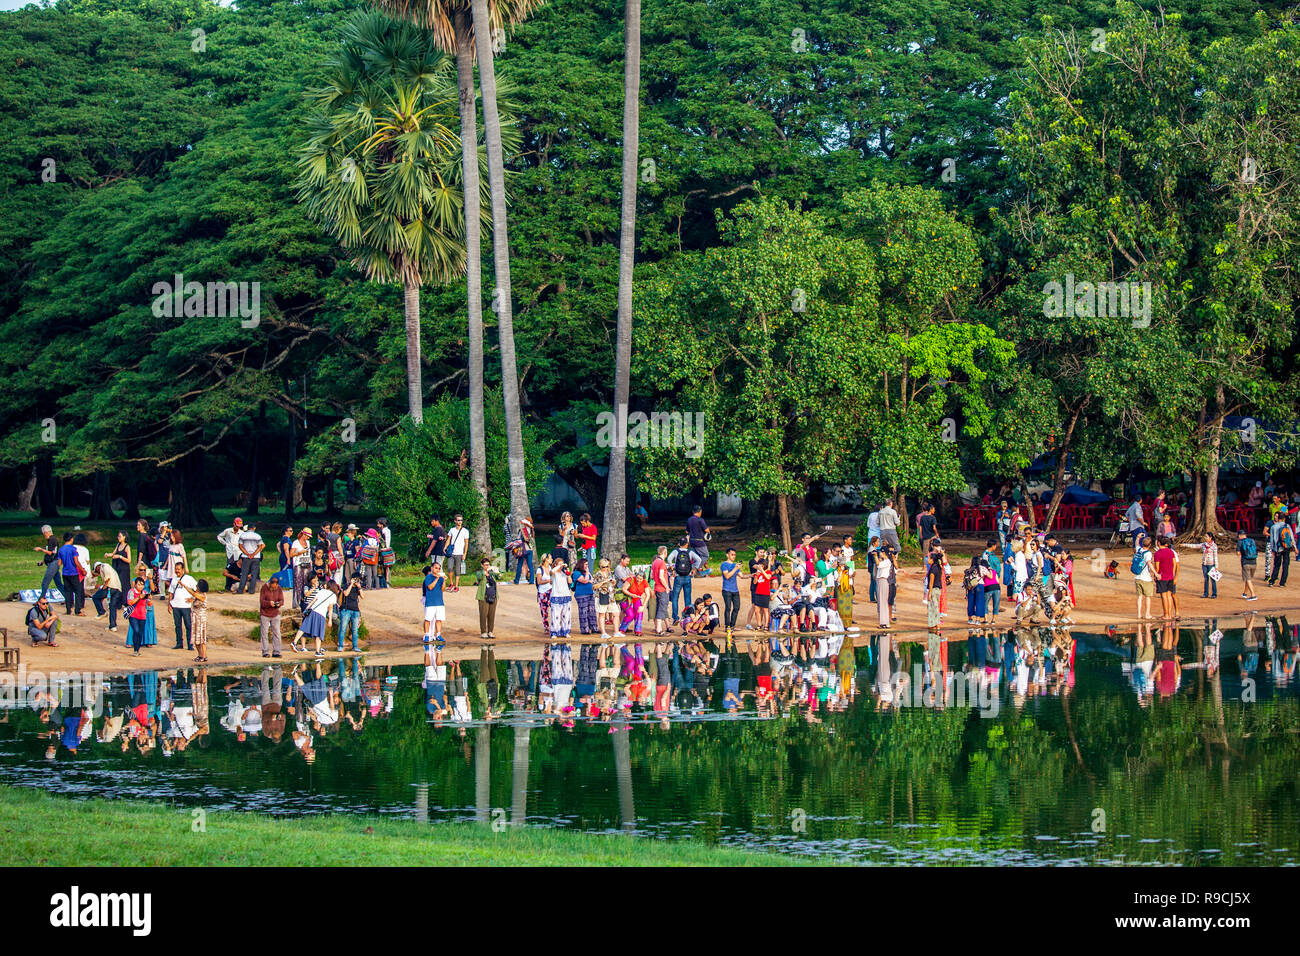 Tourists watch sunrise across a pond with green trees in background at Angkor Wat temple complex in Siem Reap, Cambodia. Stock Photo